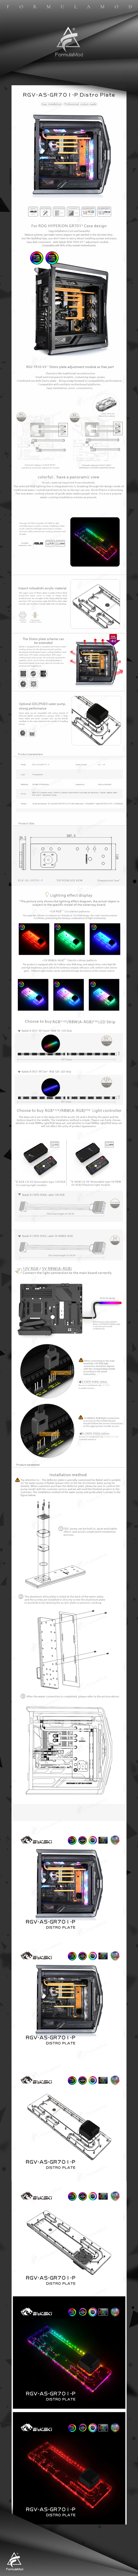 Bykski Distro Plate For Asus GR701 Case, Acrylic Waterway Board Combo DDC Pump, 5V A-RGB, RGV-AS-GR701-P  